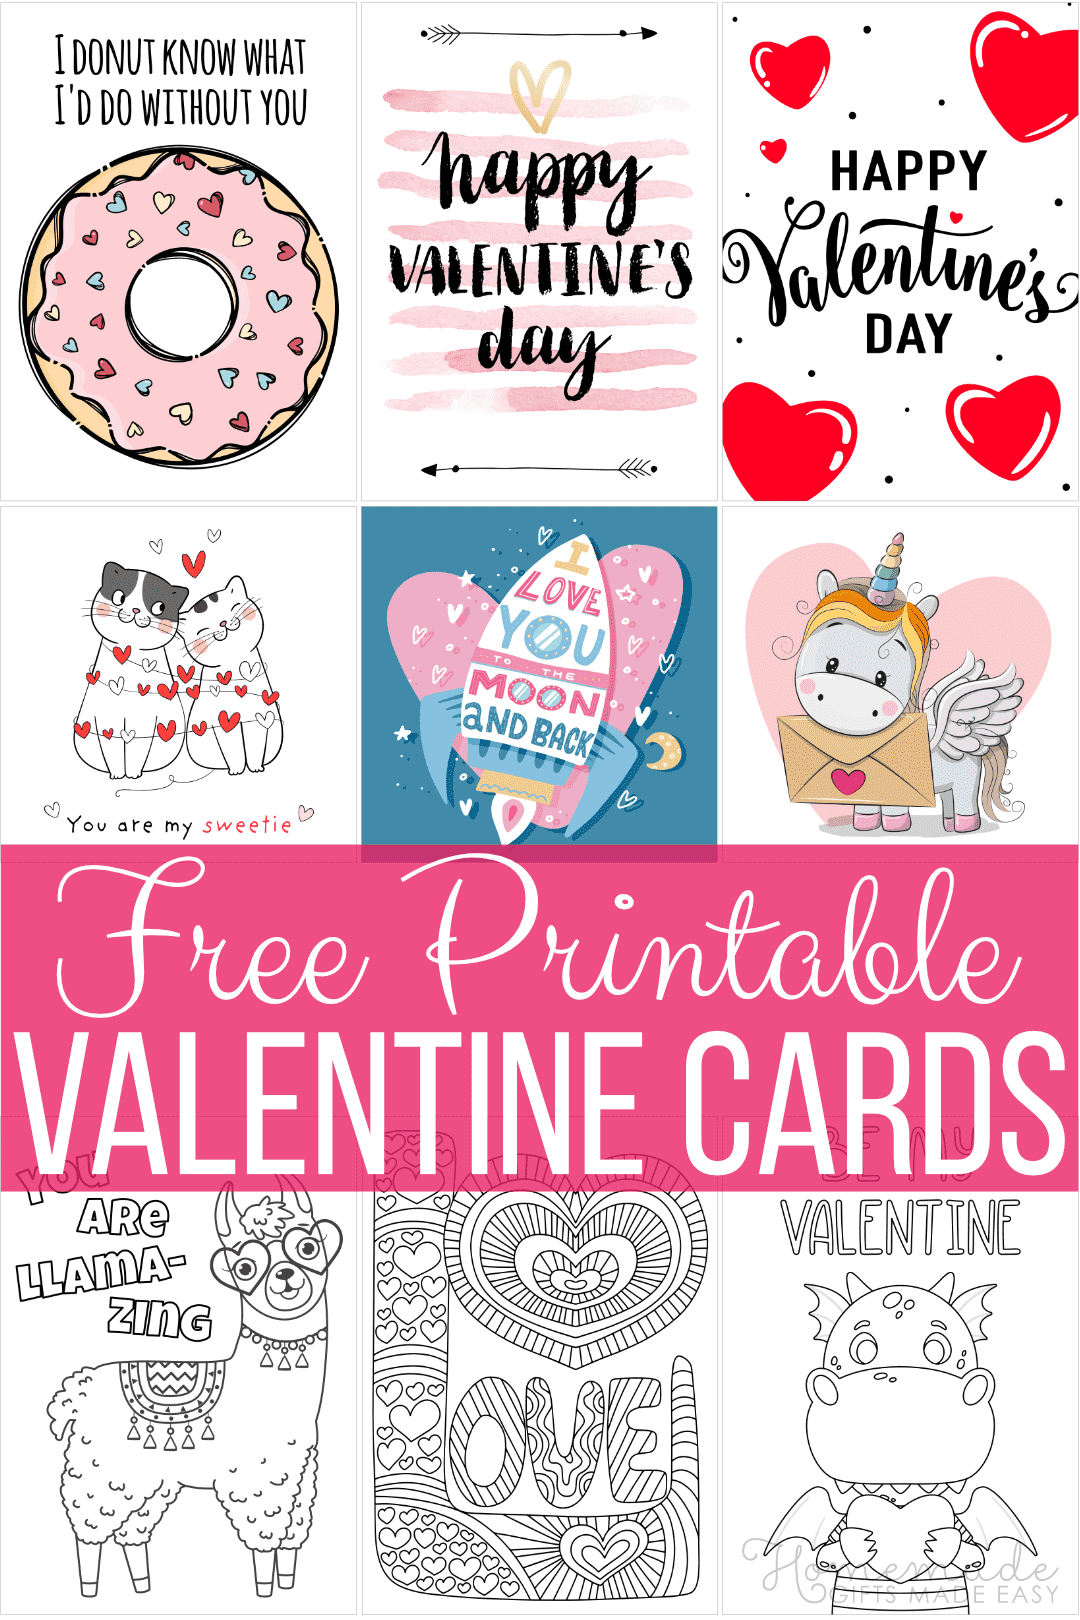 Free Printable Valentine Cards And Envelopes